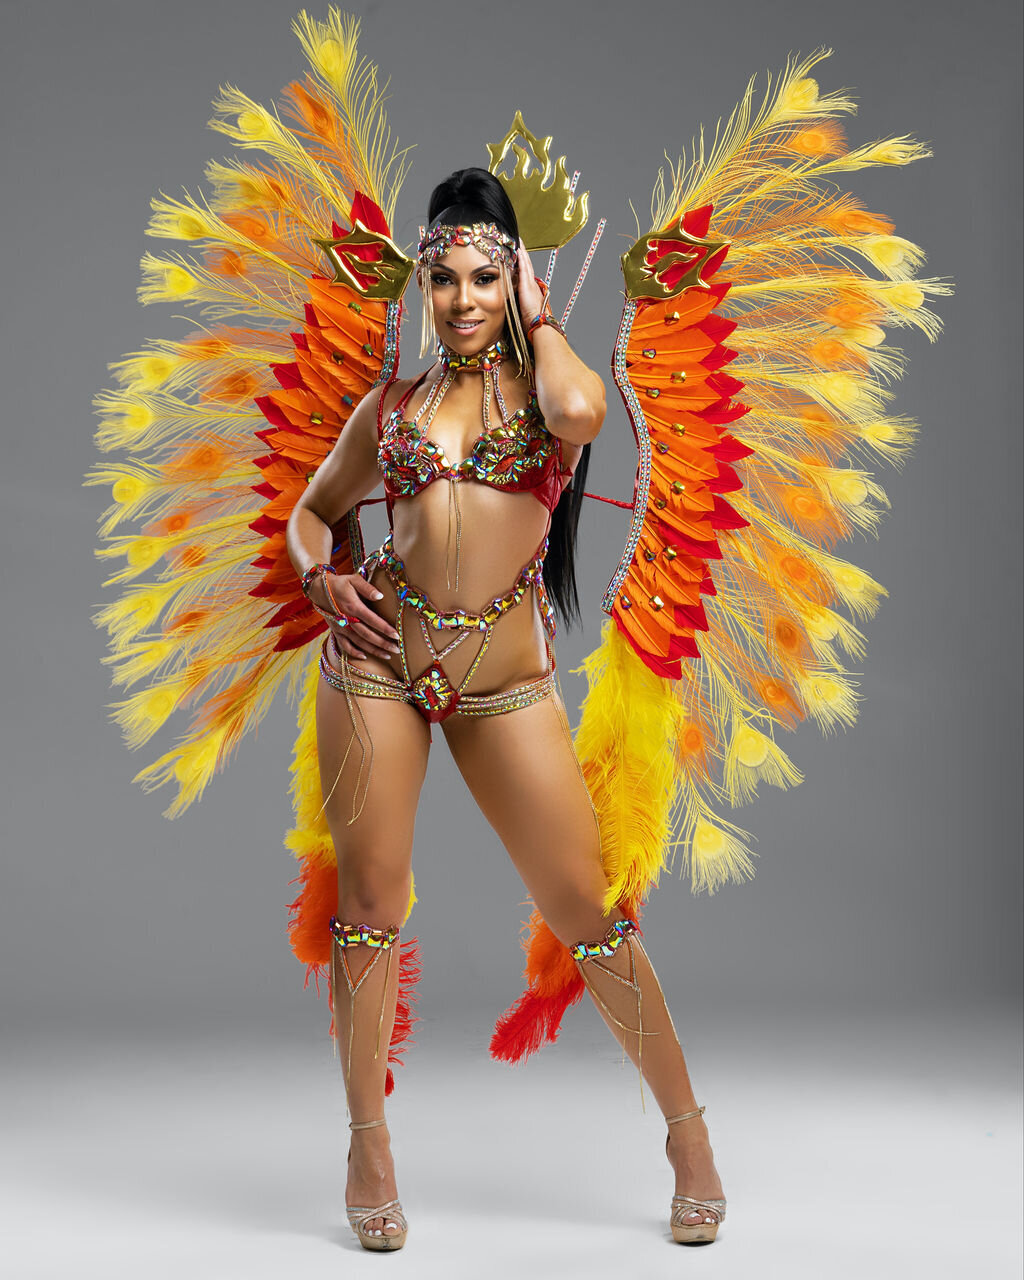 Red and Yellow costume for Caribana Toronto. Register to play mas with Sunlime Mas